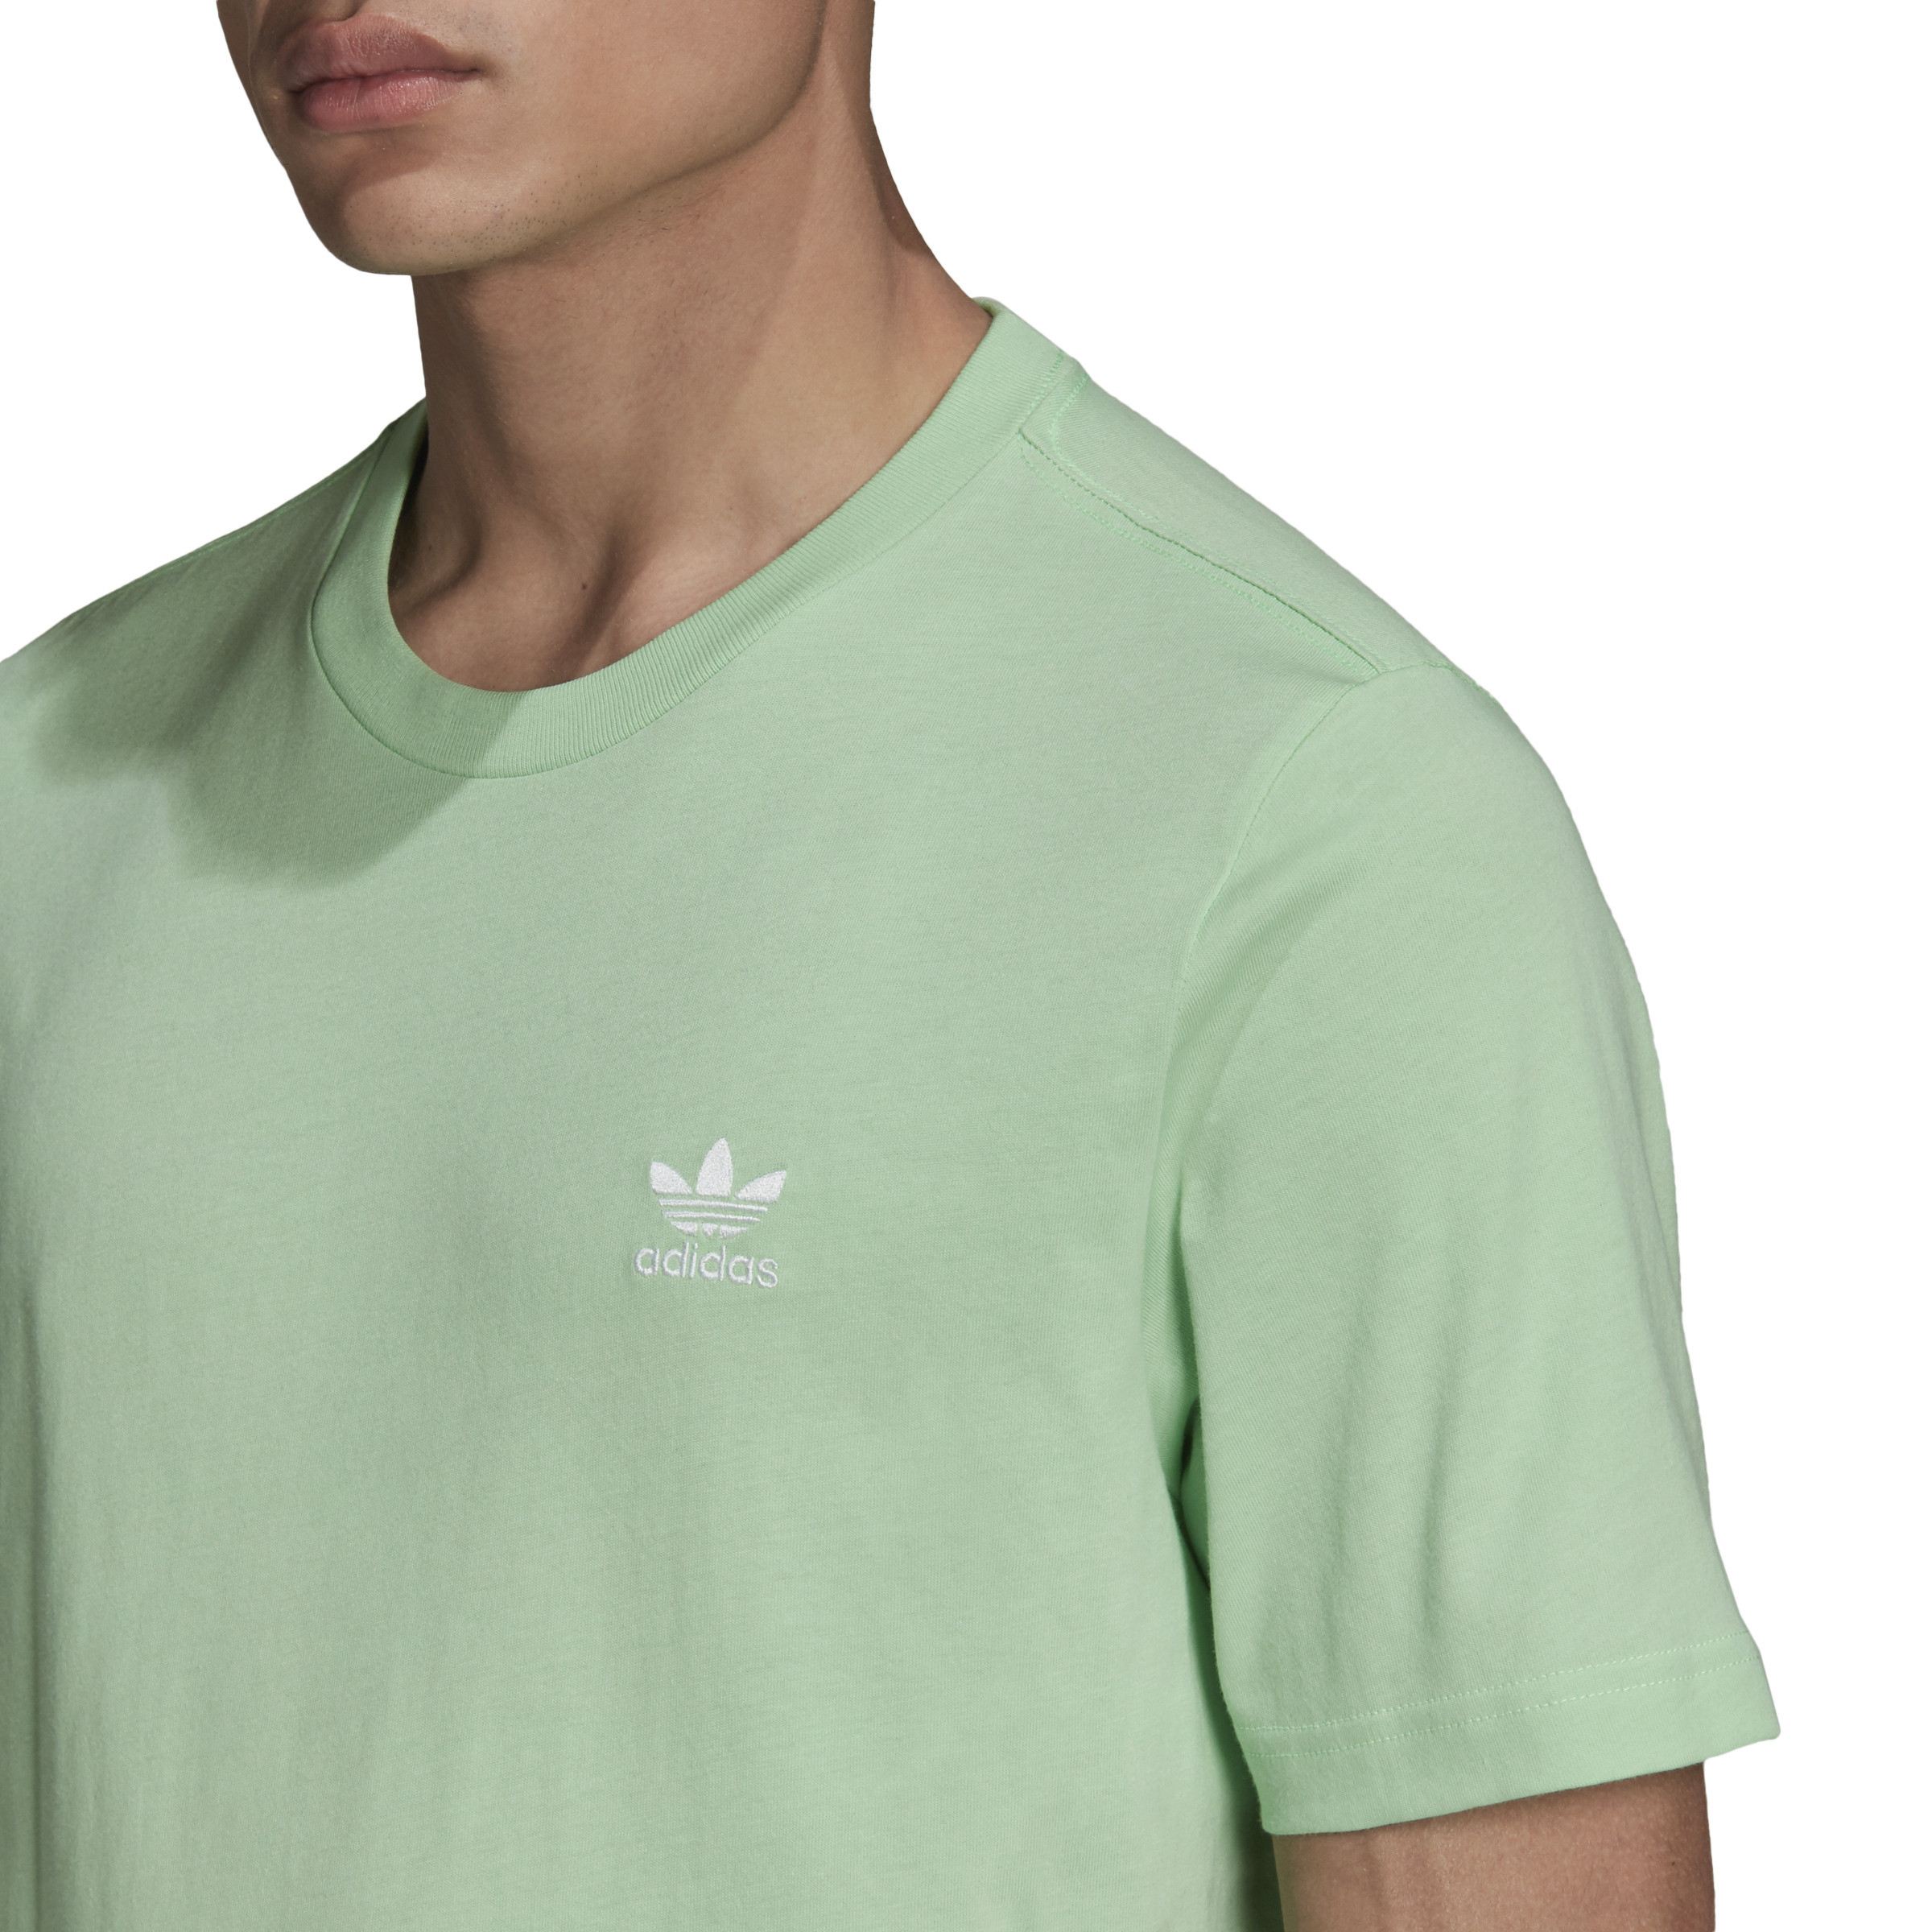 Adidas - Adicolor T-shirt with logo, Light Green, large image number 4